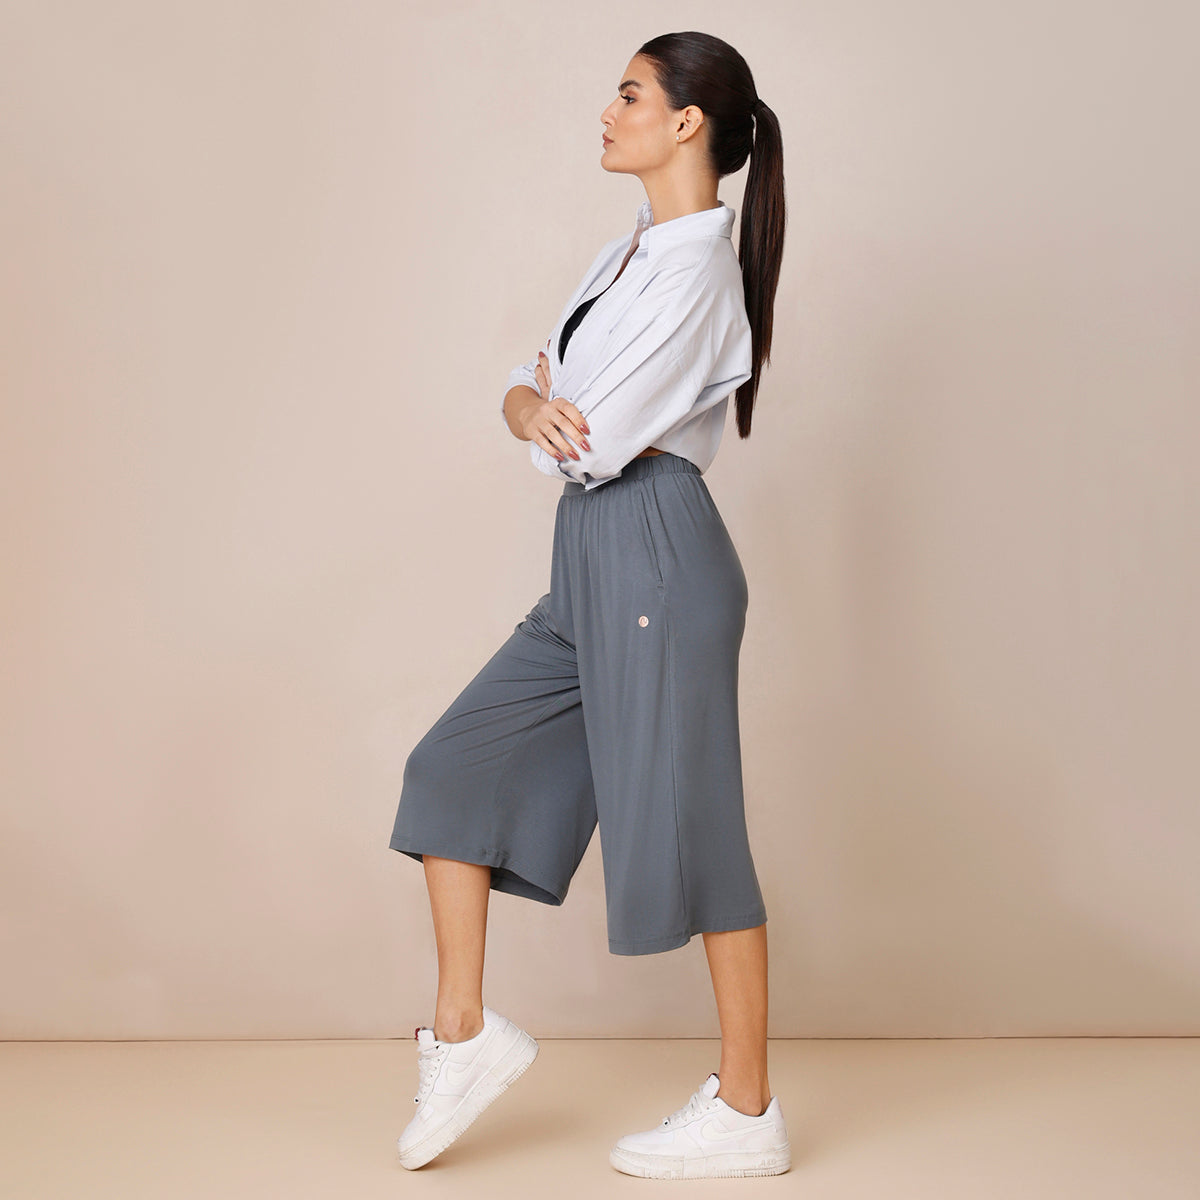 Nykd All Day Sooo Comfy Super Soft Modal Lounge Culottes-NYLE059 Pewter